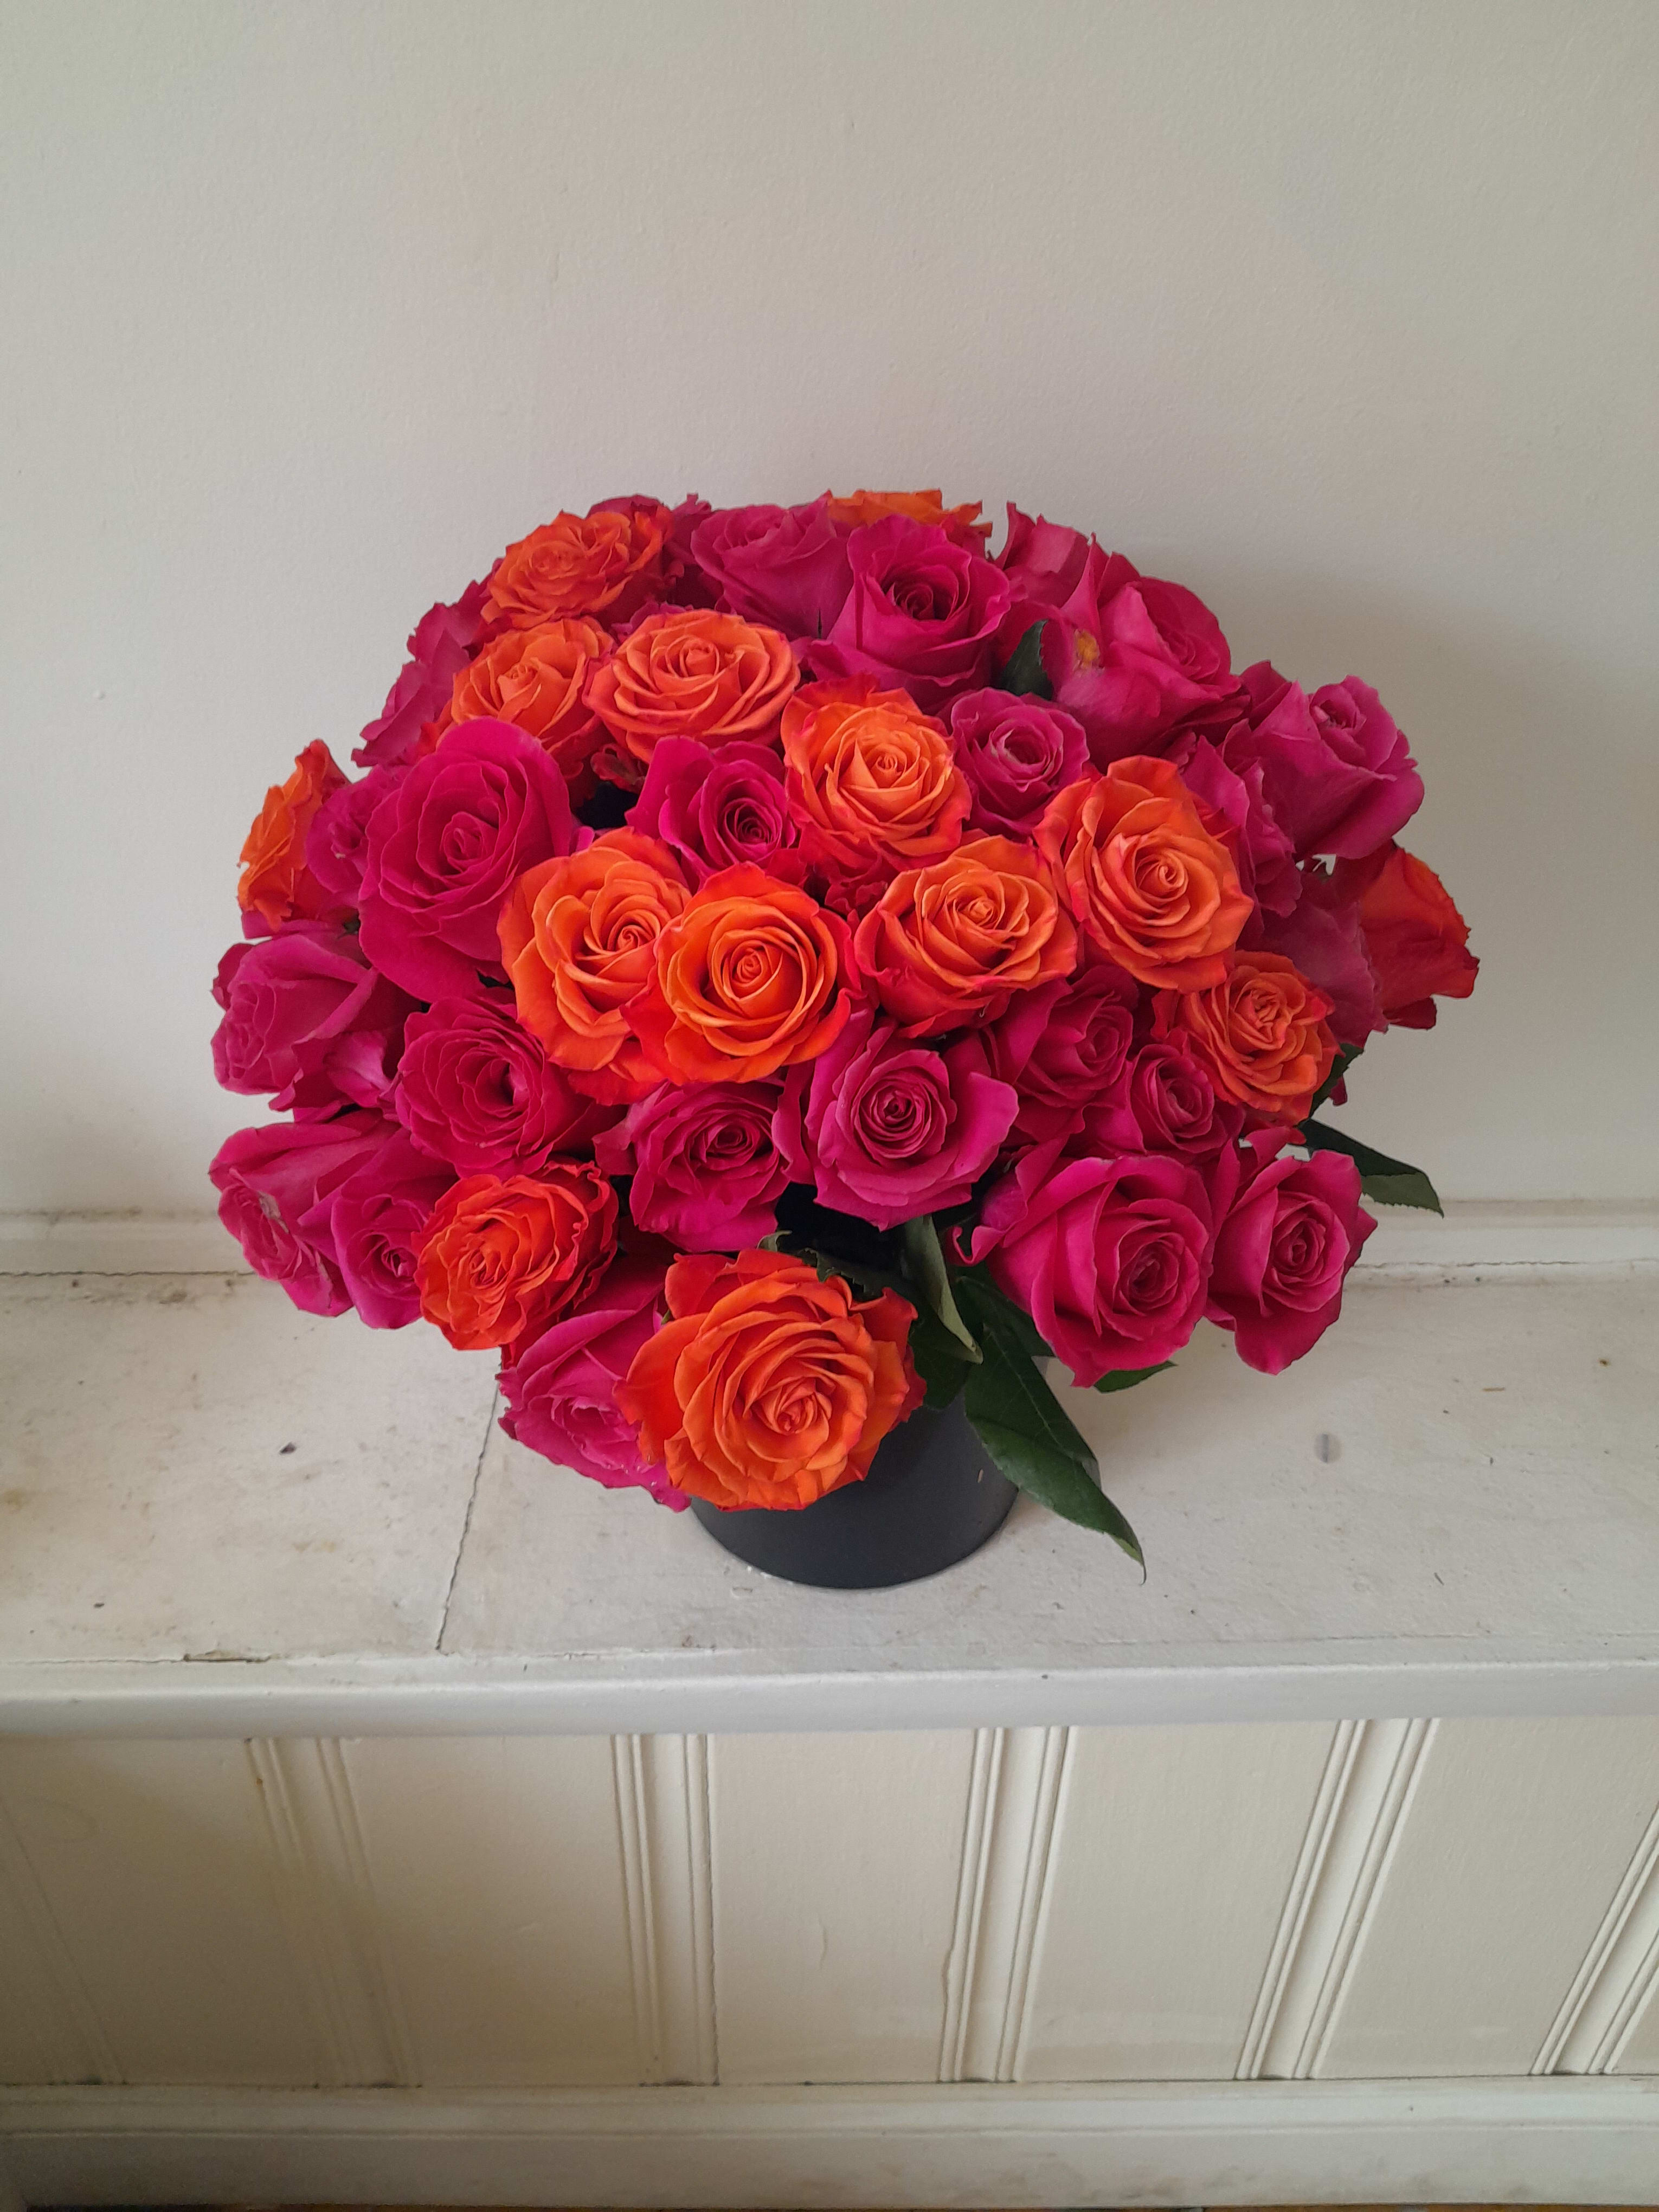 Pink Floid maze - Beautiful hot pink Pink Floid roses mixed with some orange roses in one bunch